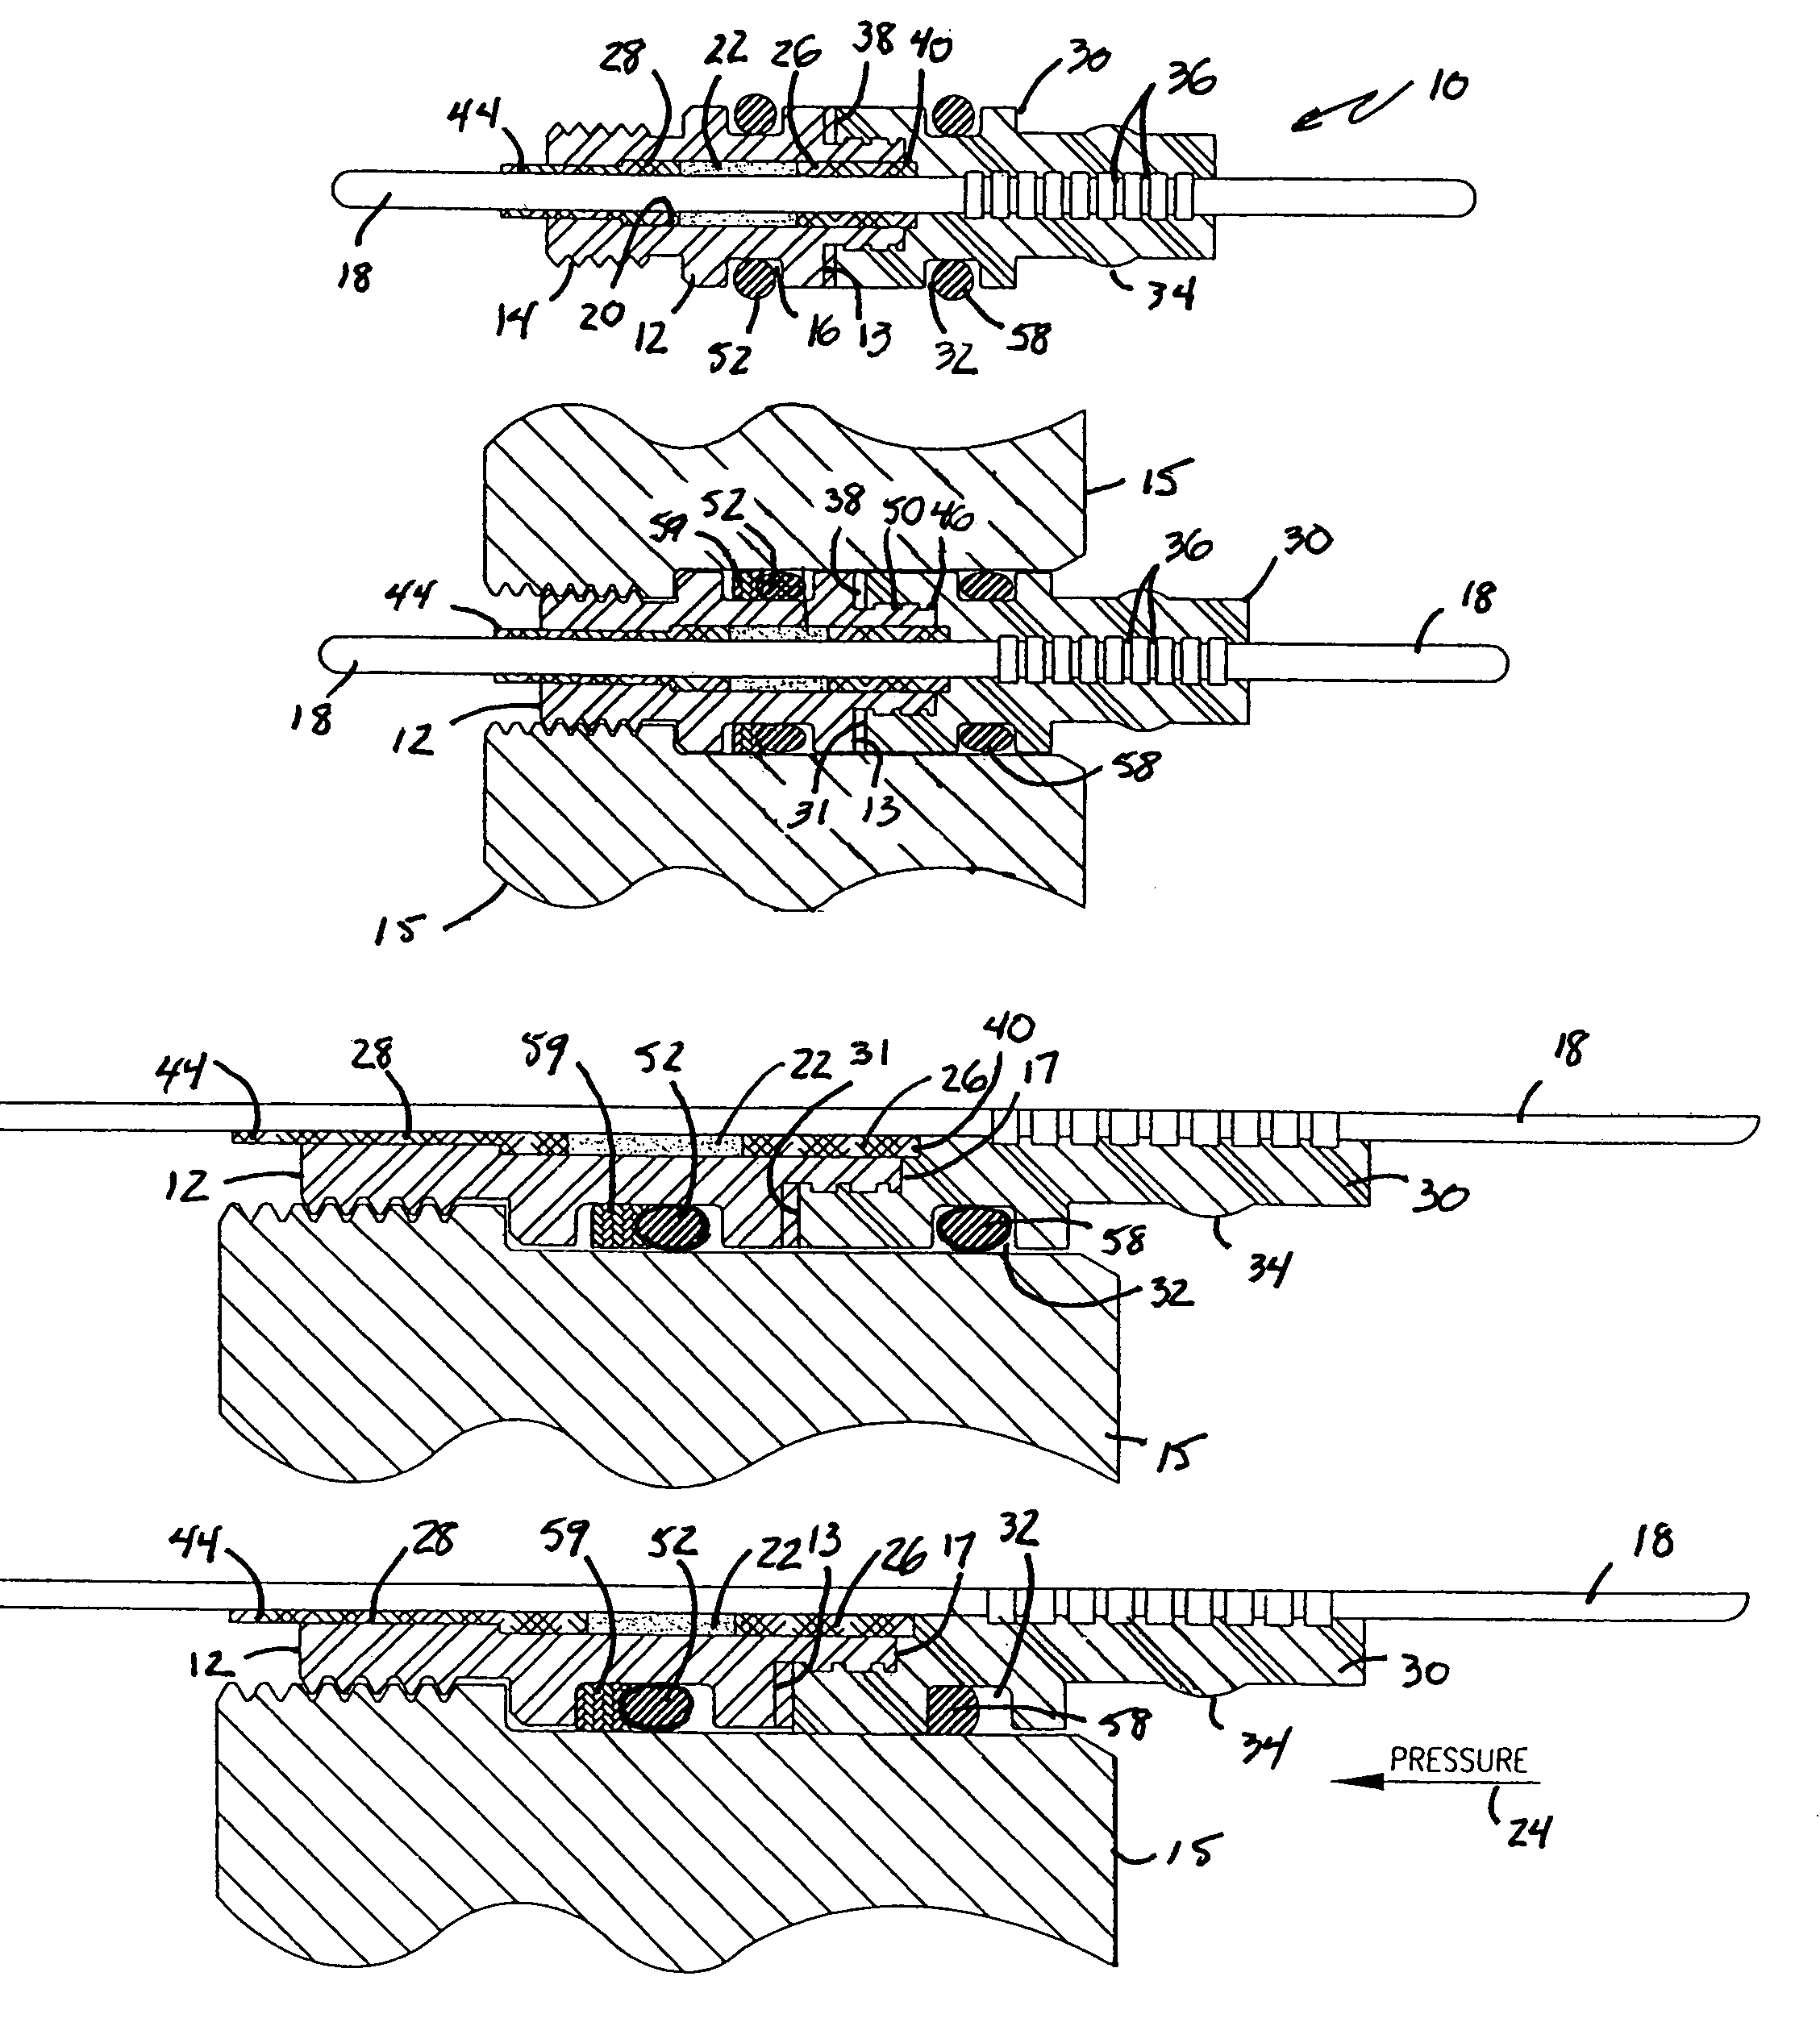 Hybrid glass-sealed electrical connectors